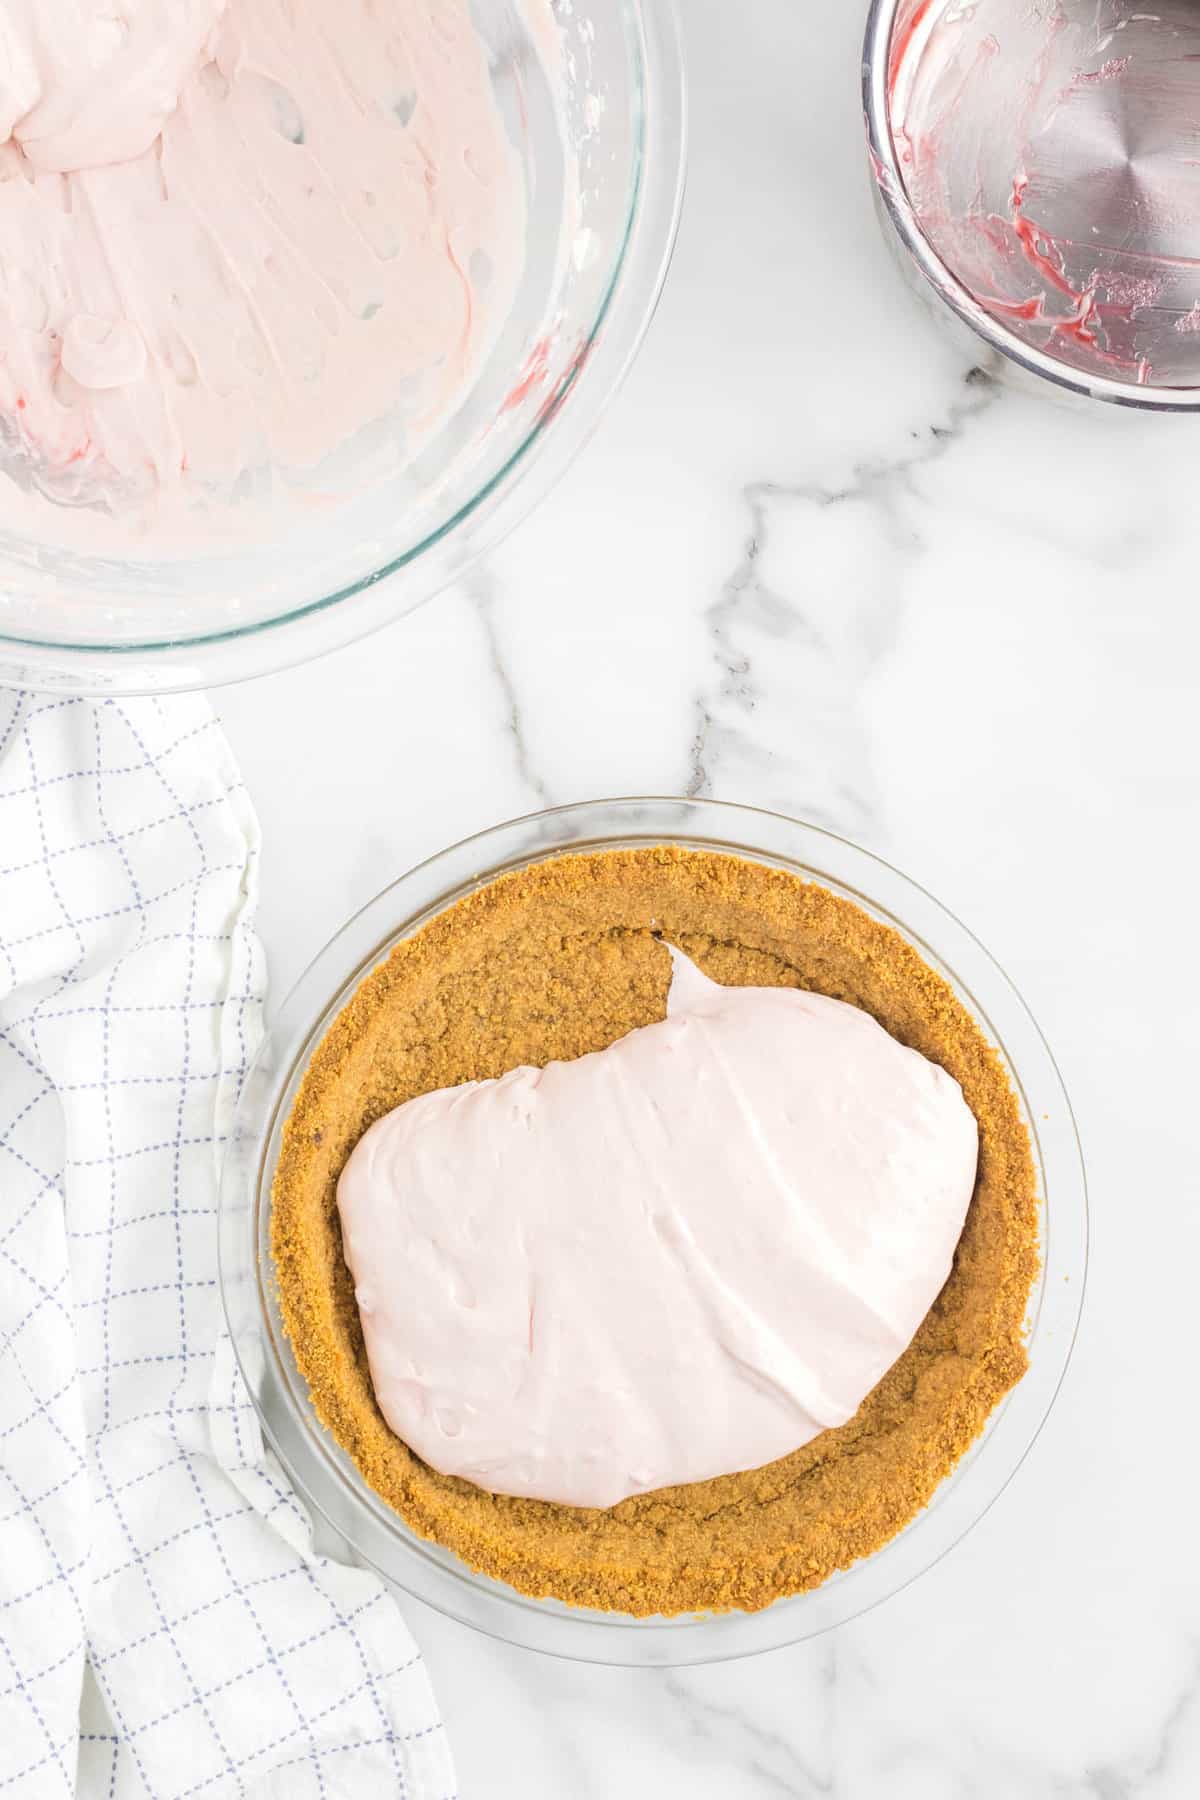 Adding Cheesecake Filling into Graham Cracker Crust for No Bake Strawberry Cheesecake